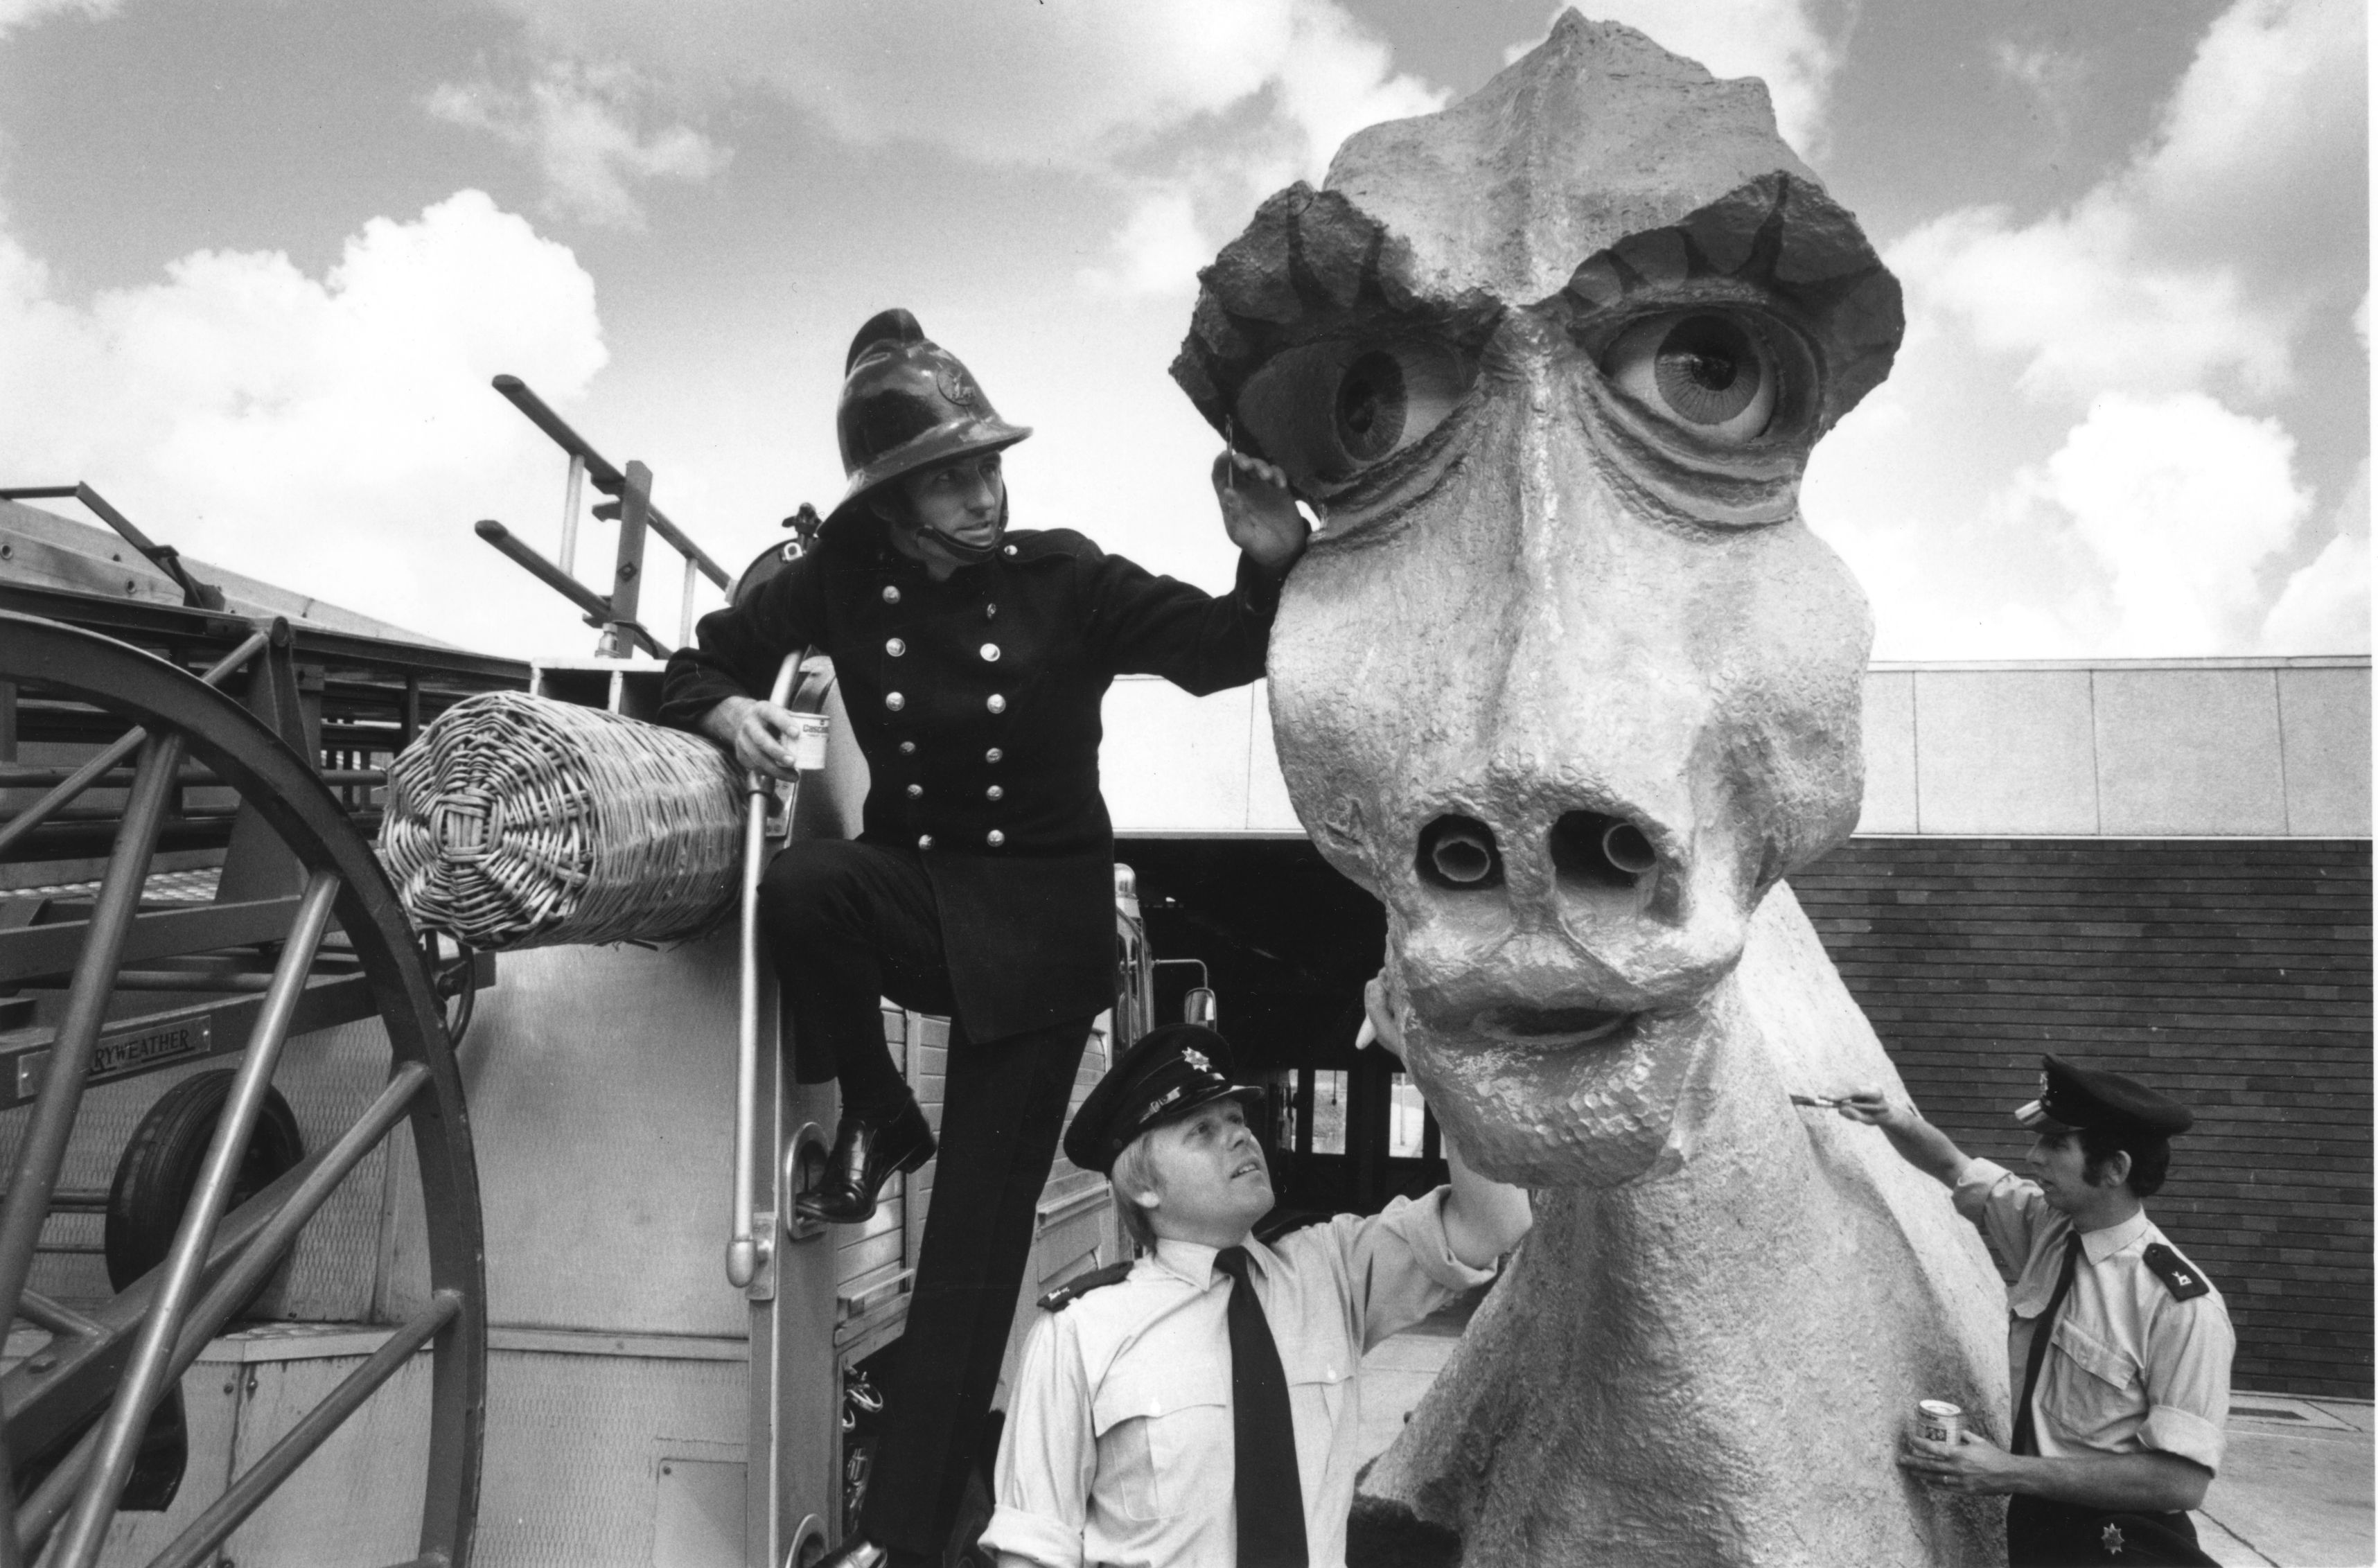 In 1975, Firemen from Hemel Hempstead, London, adding the finishing touches to a seductive female Nessie, intended to lure the Loch Ness Monster from his Scottish depths. The beautiful beast is 30ft long, 14ft high and 10ft wide and is made from oil drums and paper mache. She has an amplified mating call, can puff smoke through her nostrils, and carries a hidden camera to record the momentous meeting.  (Getty)